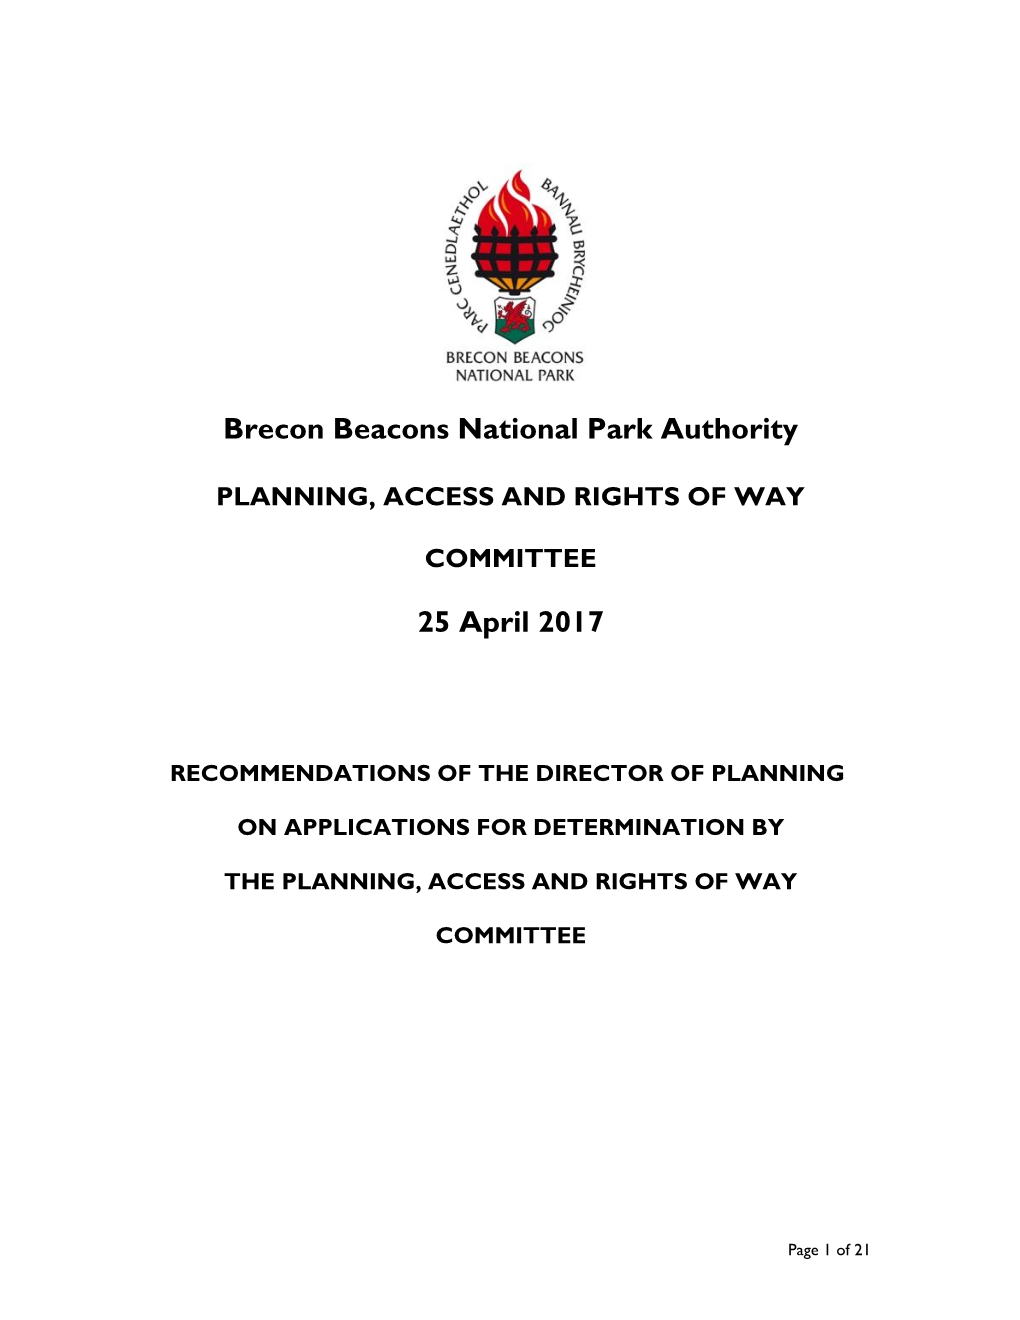 Brecon Beacons National Park Authority PLANNING, ACCESS